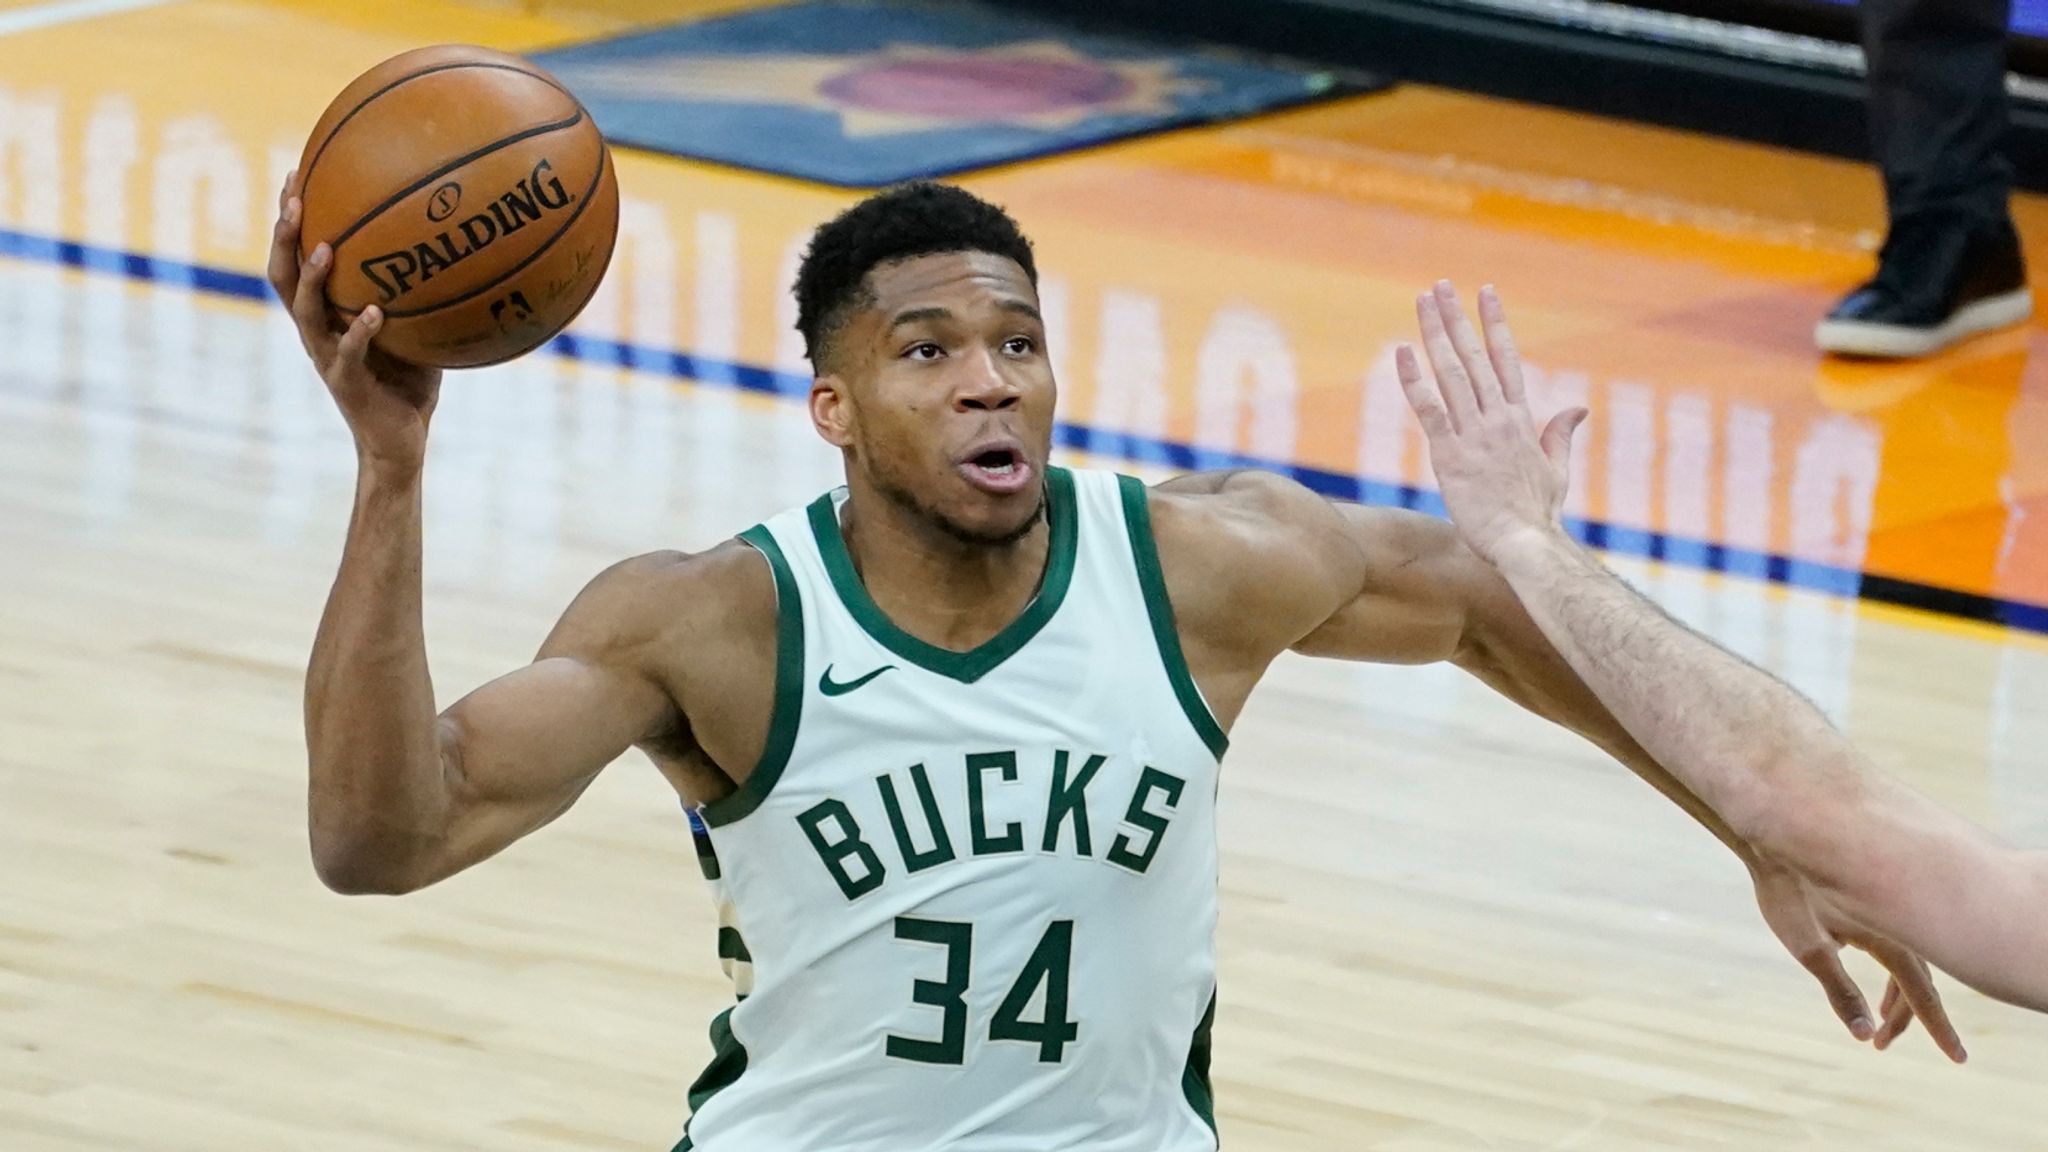 Washington Wizards guard Russell Westbrook (4) dribbles the ball during the  second half of an NBA basketball game against Milwaukee Bucks forward  Giannis Antetokounmpo (34), Saturday, March 13, 2021, in Washington. The